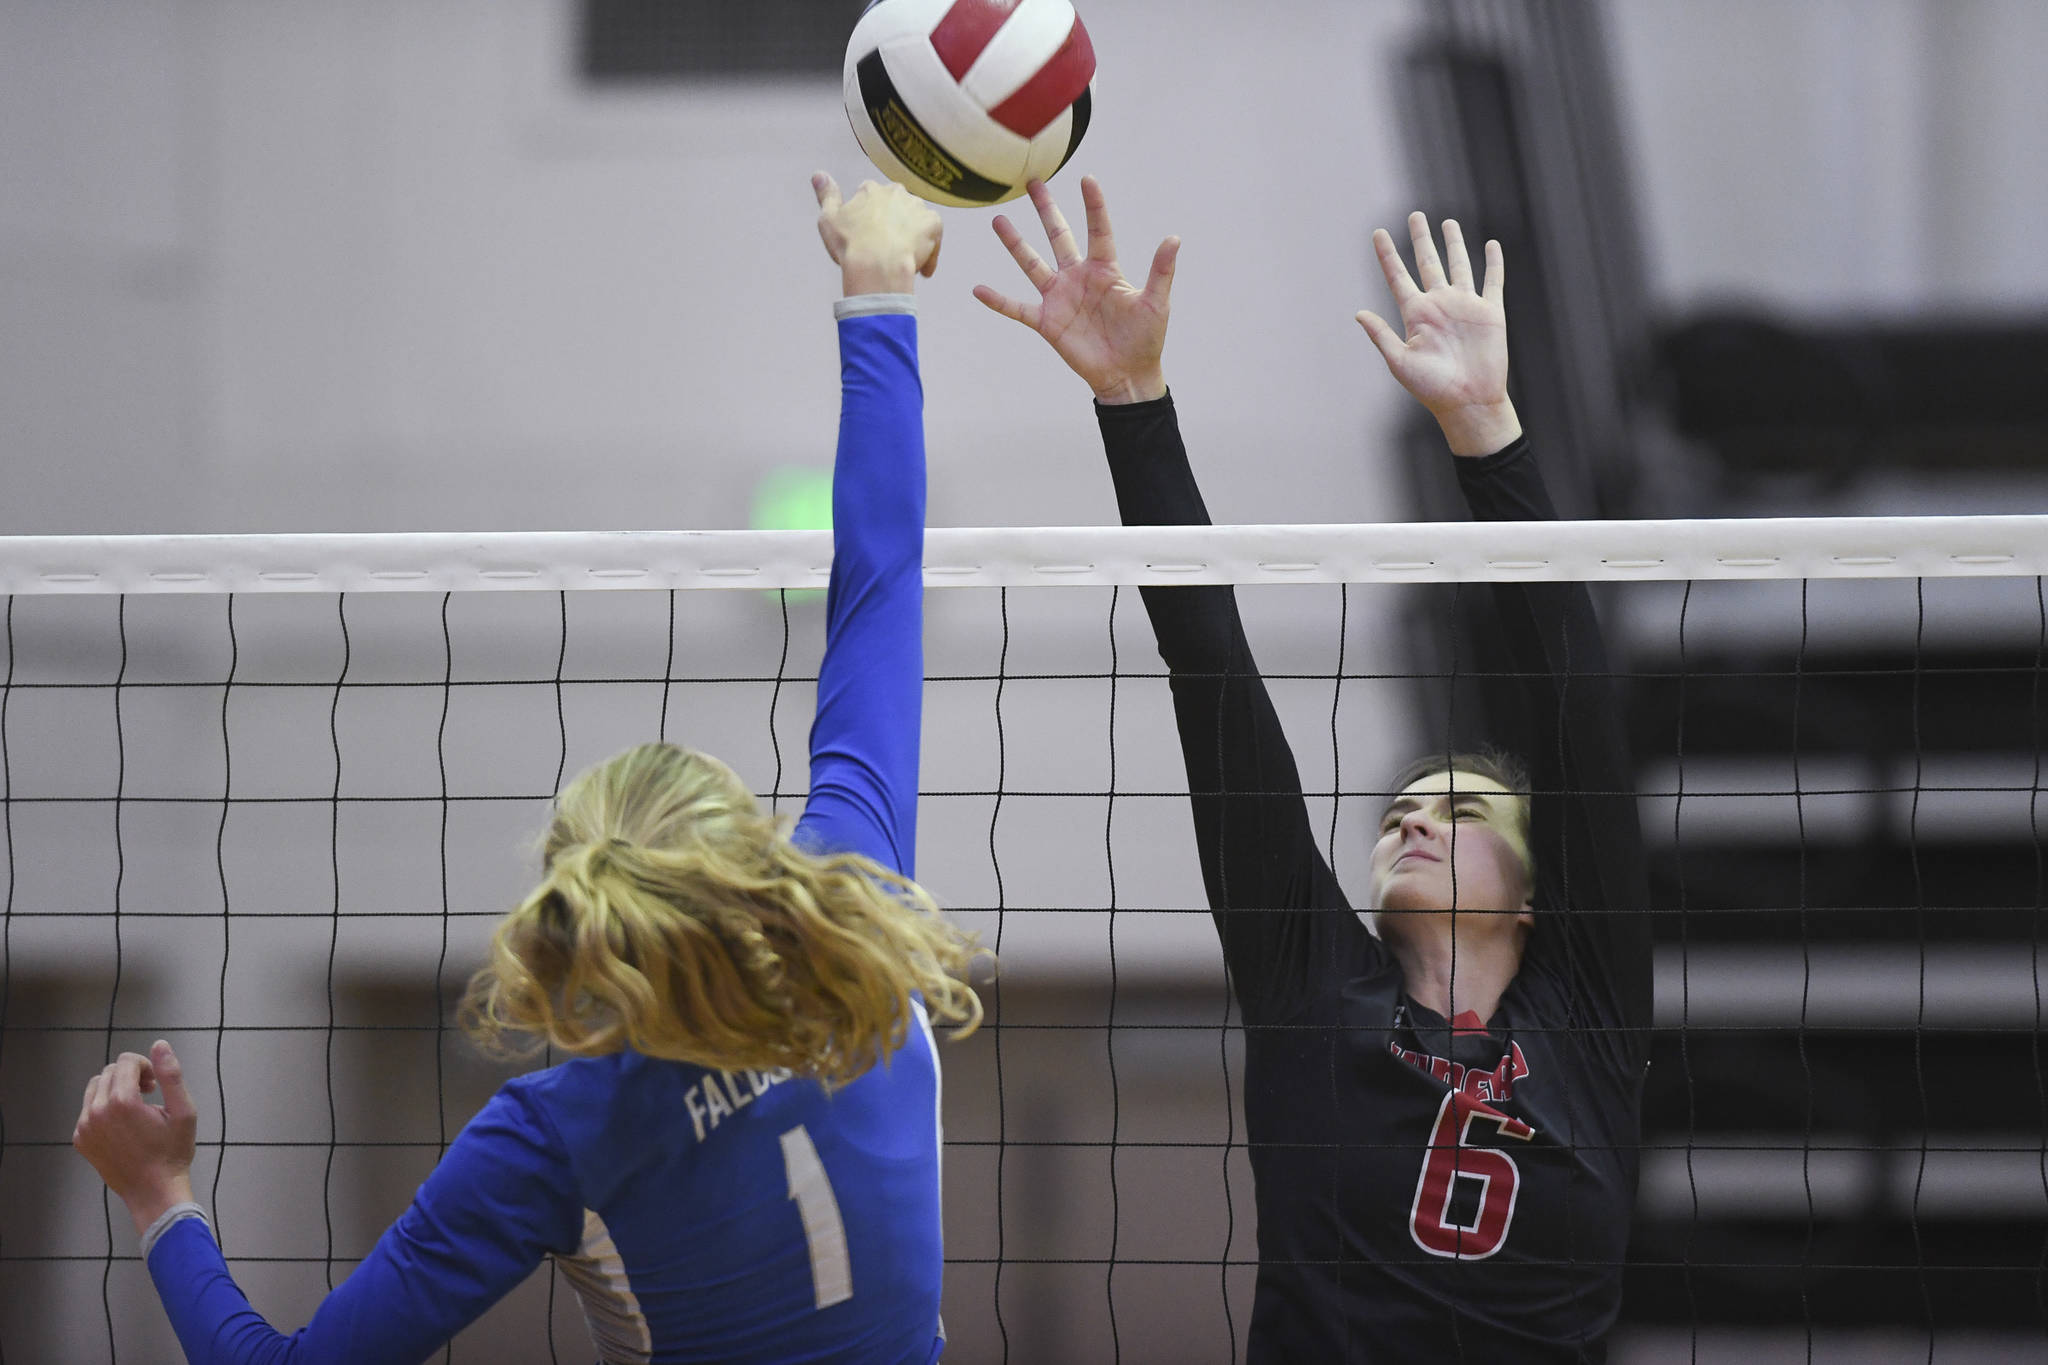 Thunder Mountain’s Marlee Smith, left, and Juneau-Douglas’ Addie Prussing compete for the ball at the Volleyball Jamboree at Juneau-Douglas High School: Yadaa.at Kalé on Friday, Aug. 30, 2019. (Michael Penn | Juneau Empire)